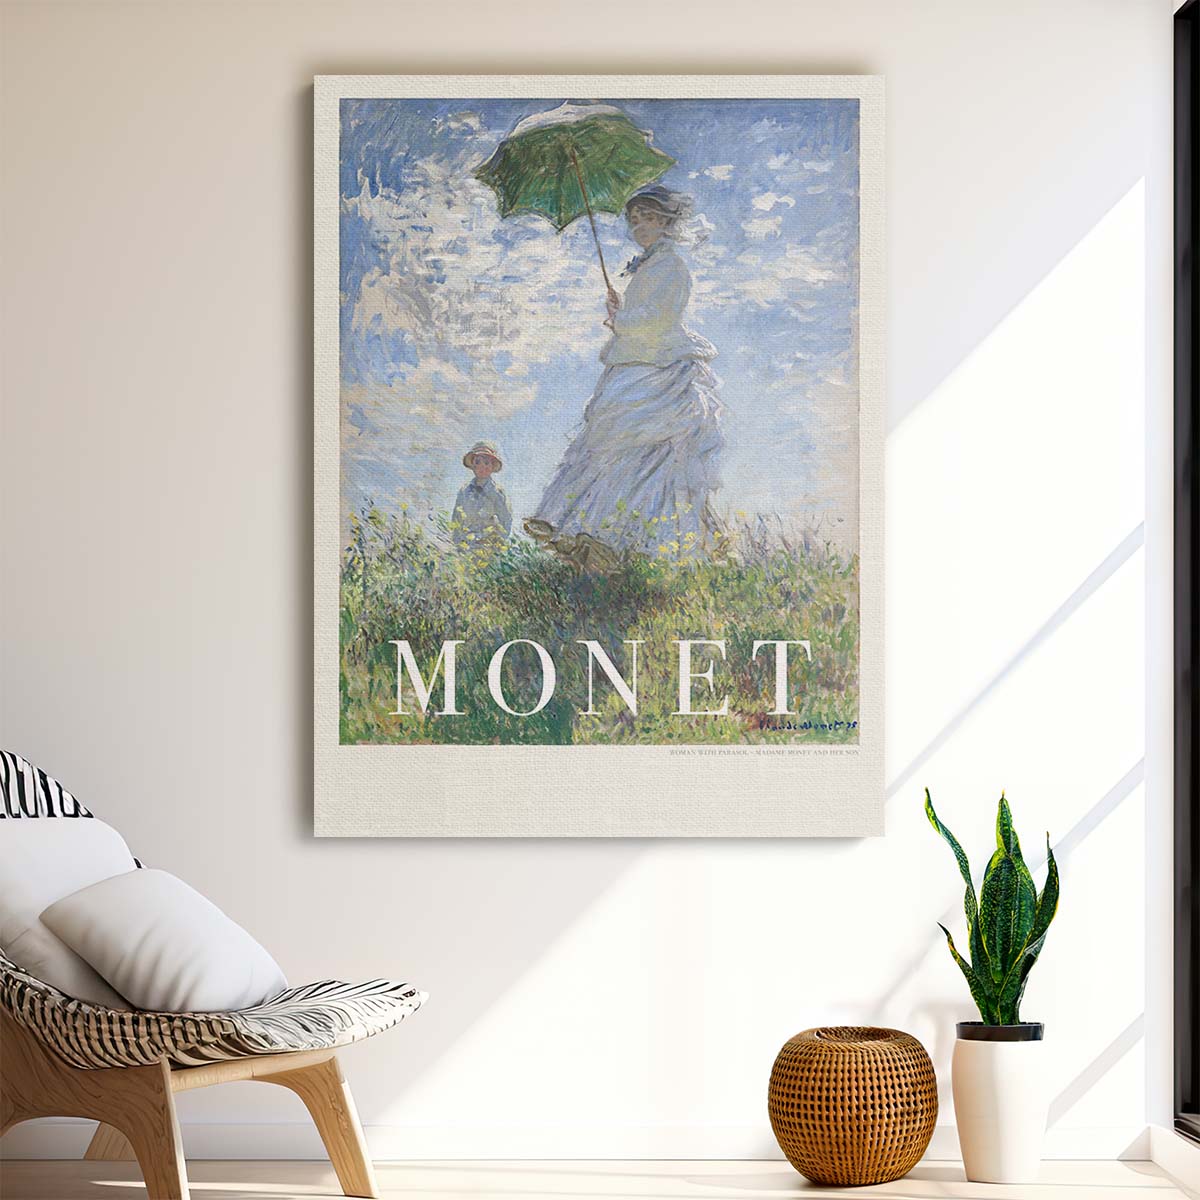 Claude Monet's Woman With Parasol, Illustrated Art Poster by Luxuriance Designs, made in USA